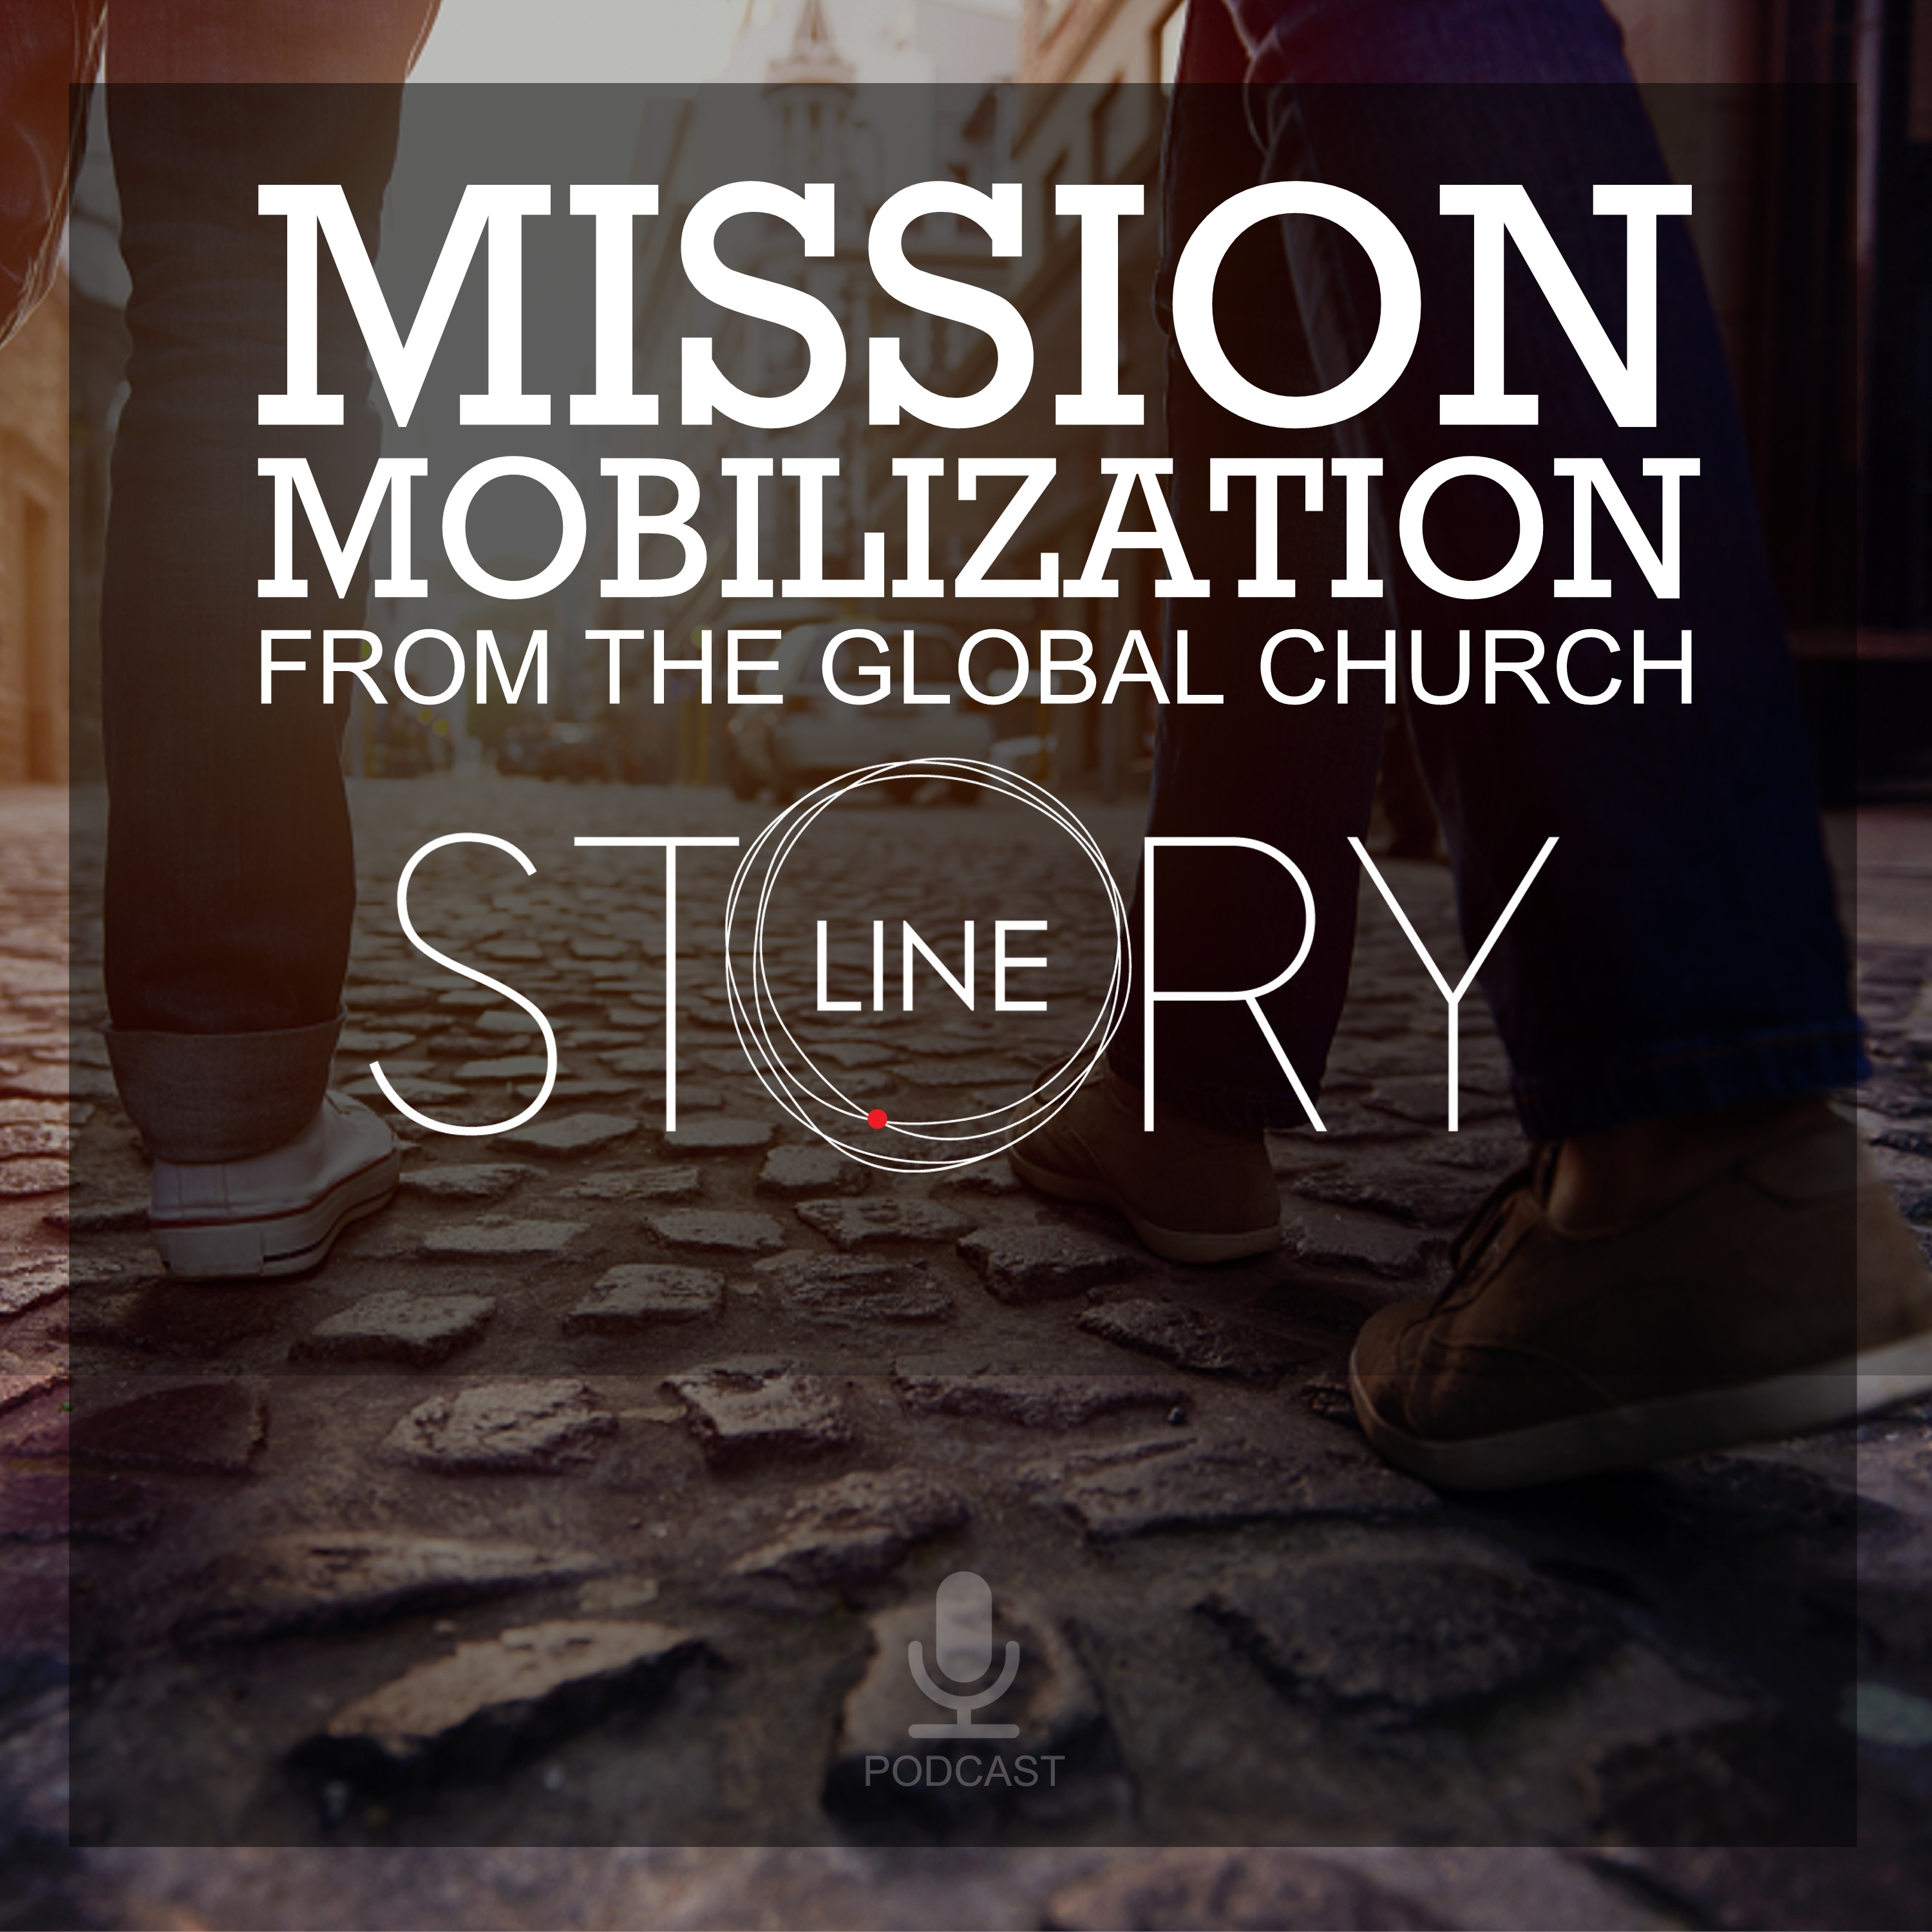 Storyline | E:18 MISSIONARY SENDING POTENTIAL FROM UKRAINE TO 10/40